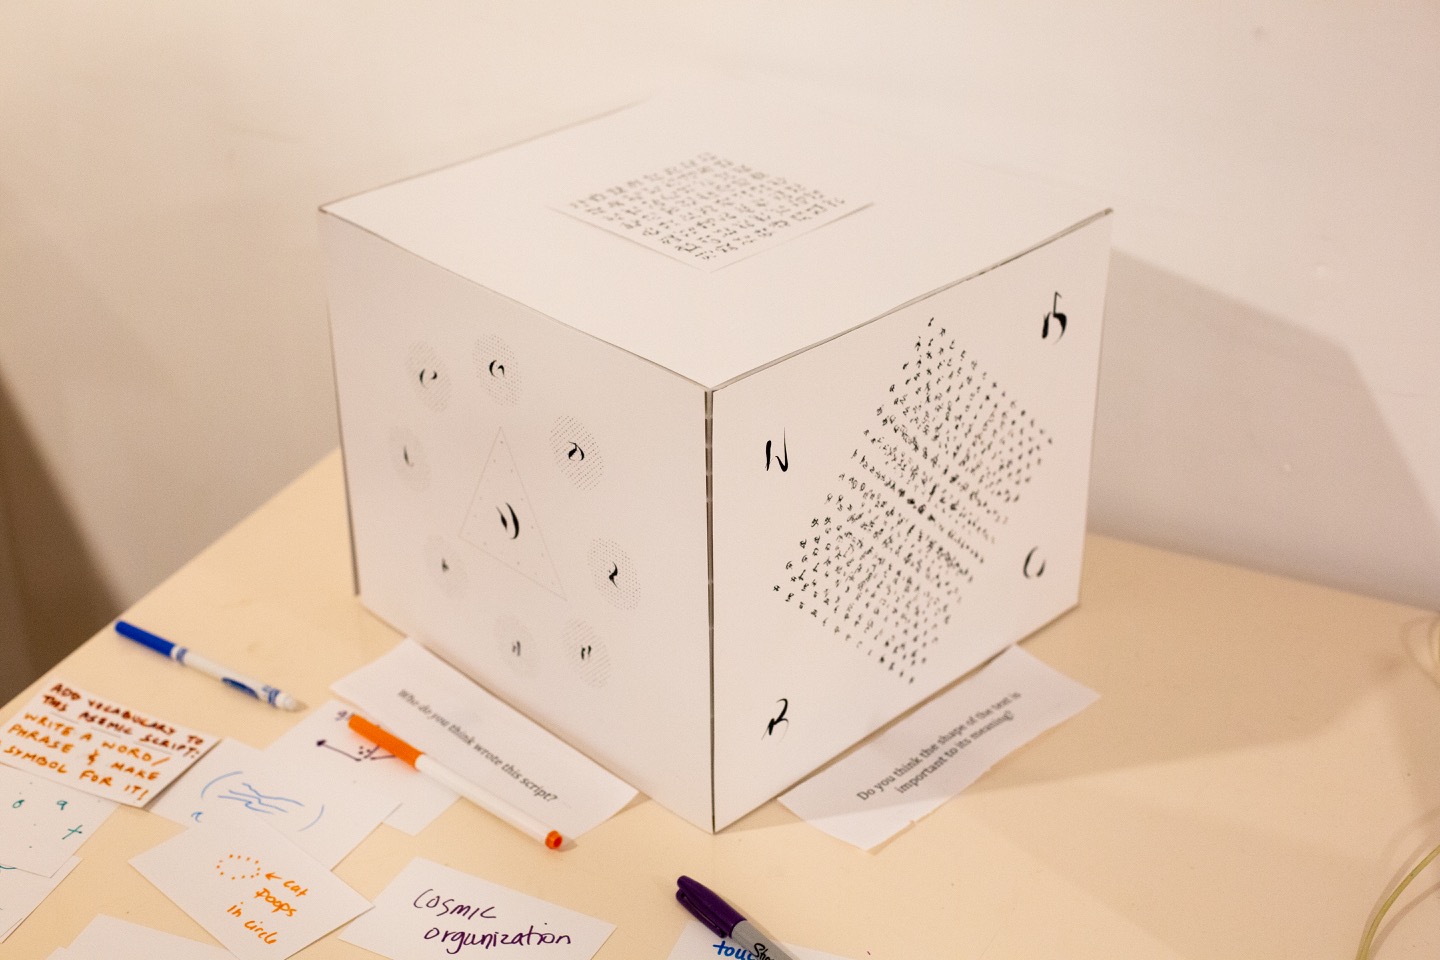 "A paper cube with asemic writing on four sides of the cube."